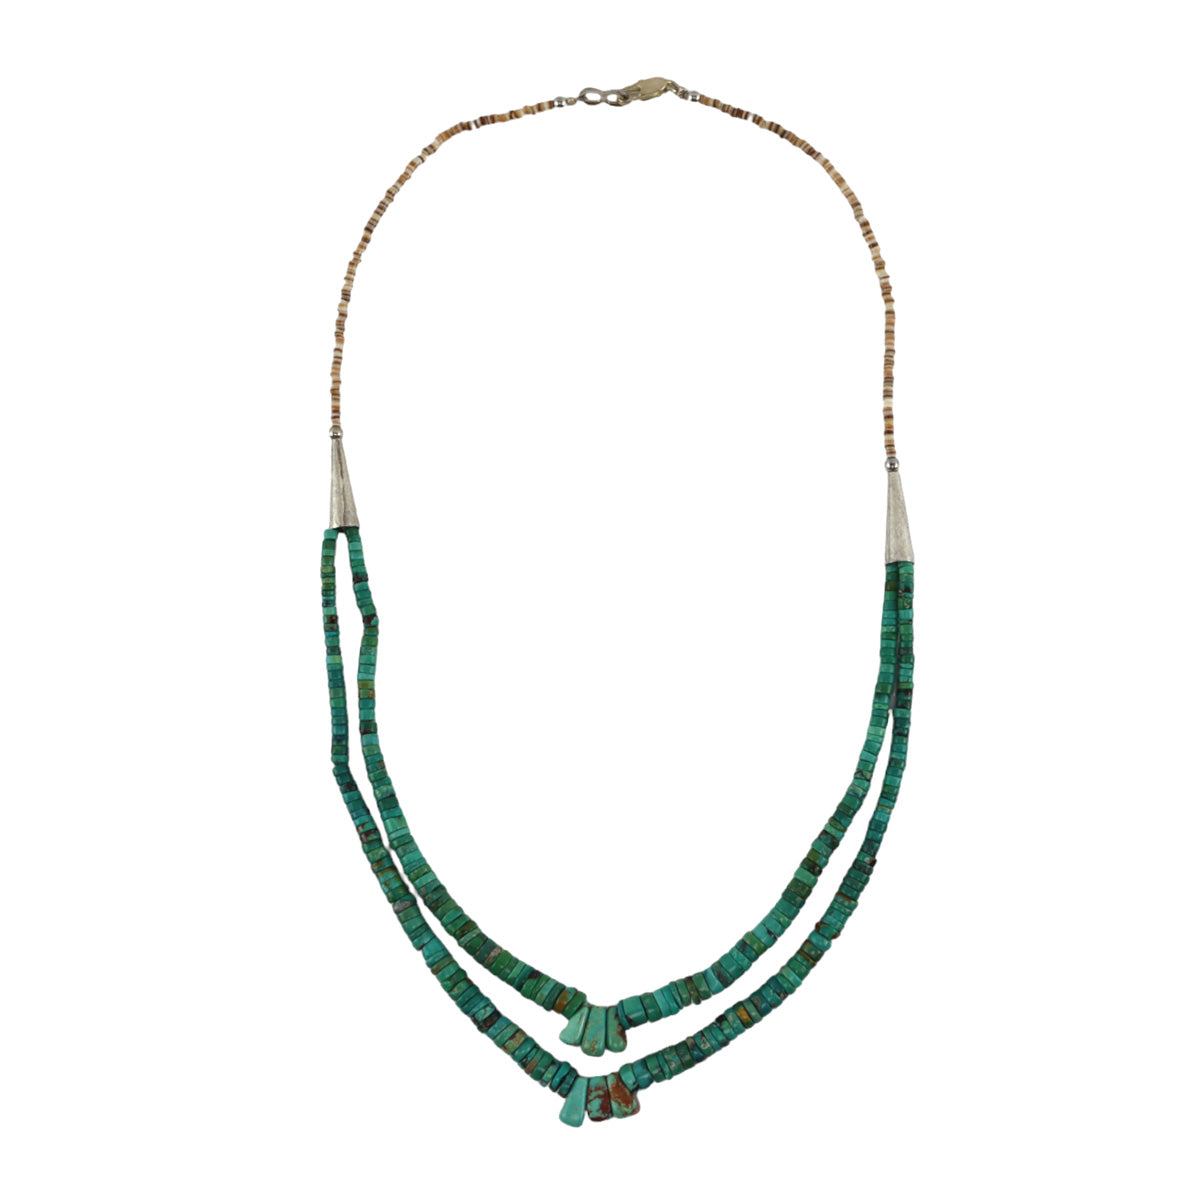 Navajo - 2 Strand Turquoise Heishi-Style Necklace c. 1960s, 19" length (J16064-031)